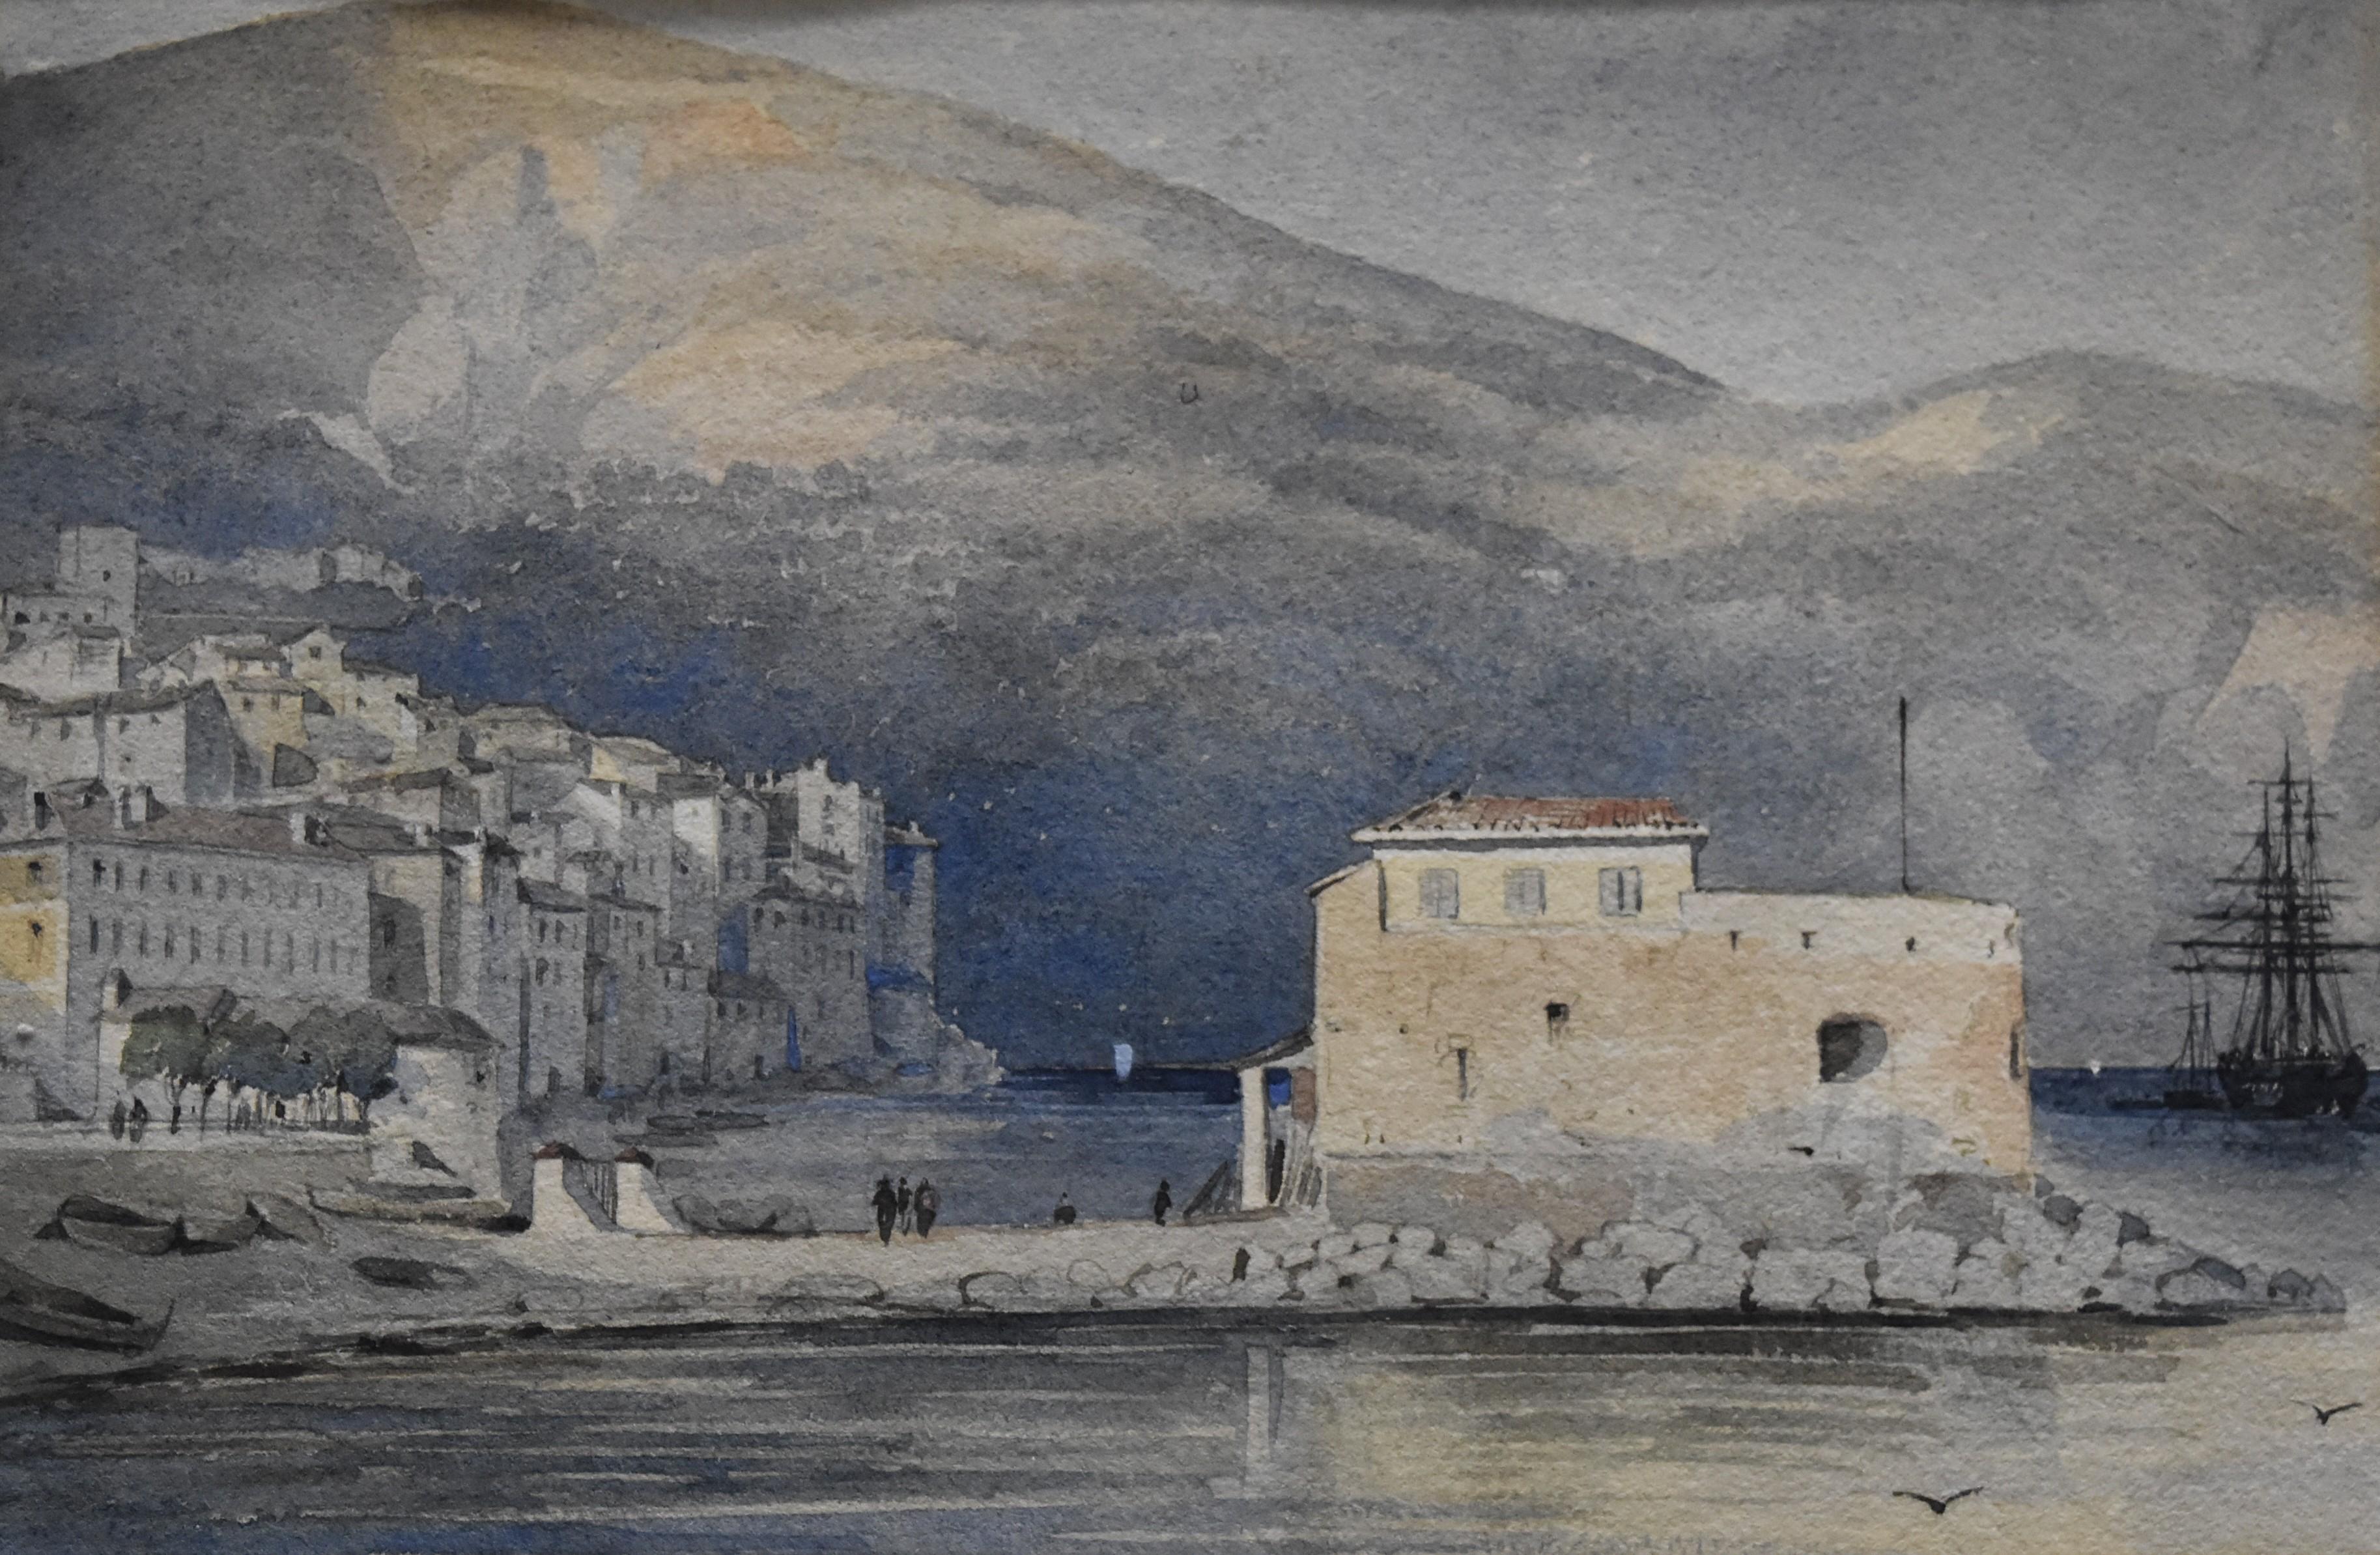 Unknown Figurative Art - 19th Century french school, Villefranche-sur Mer, the harbour, watercolor